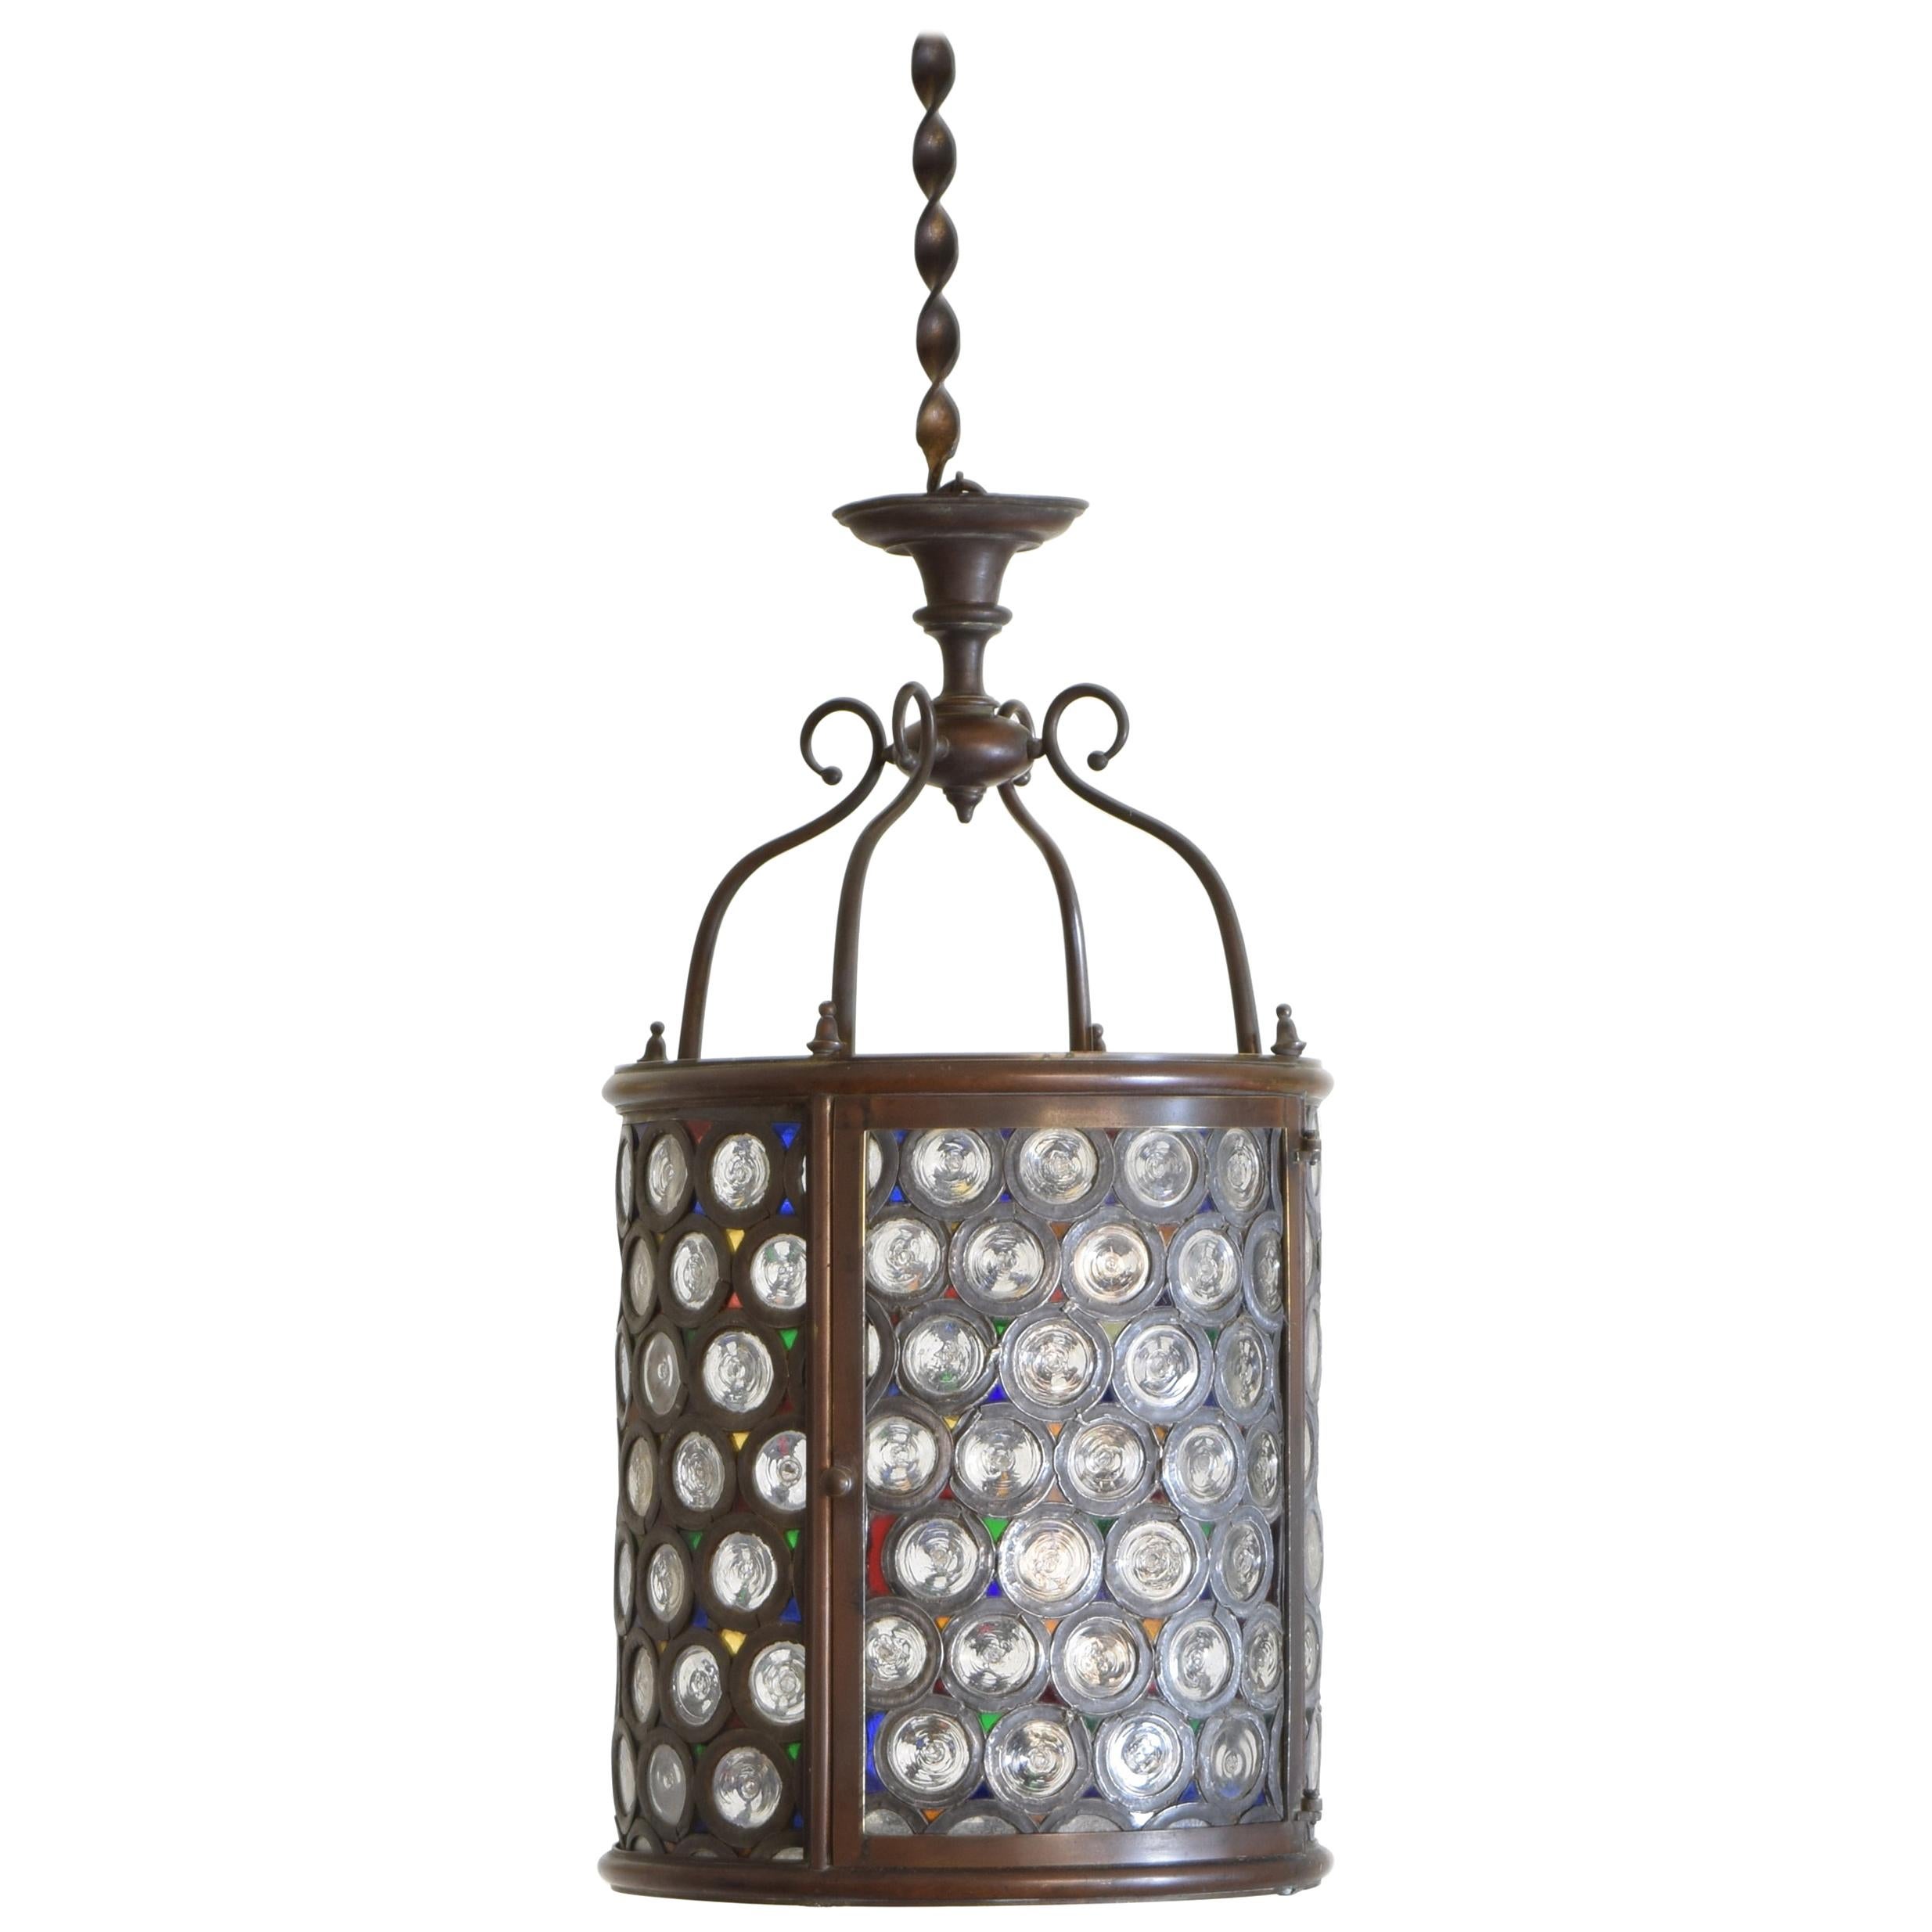 Italian Baroque Revival Period Patinated Brass & Colored & Leaded Glass Lantern